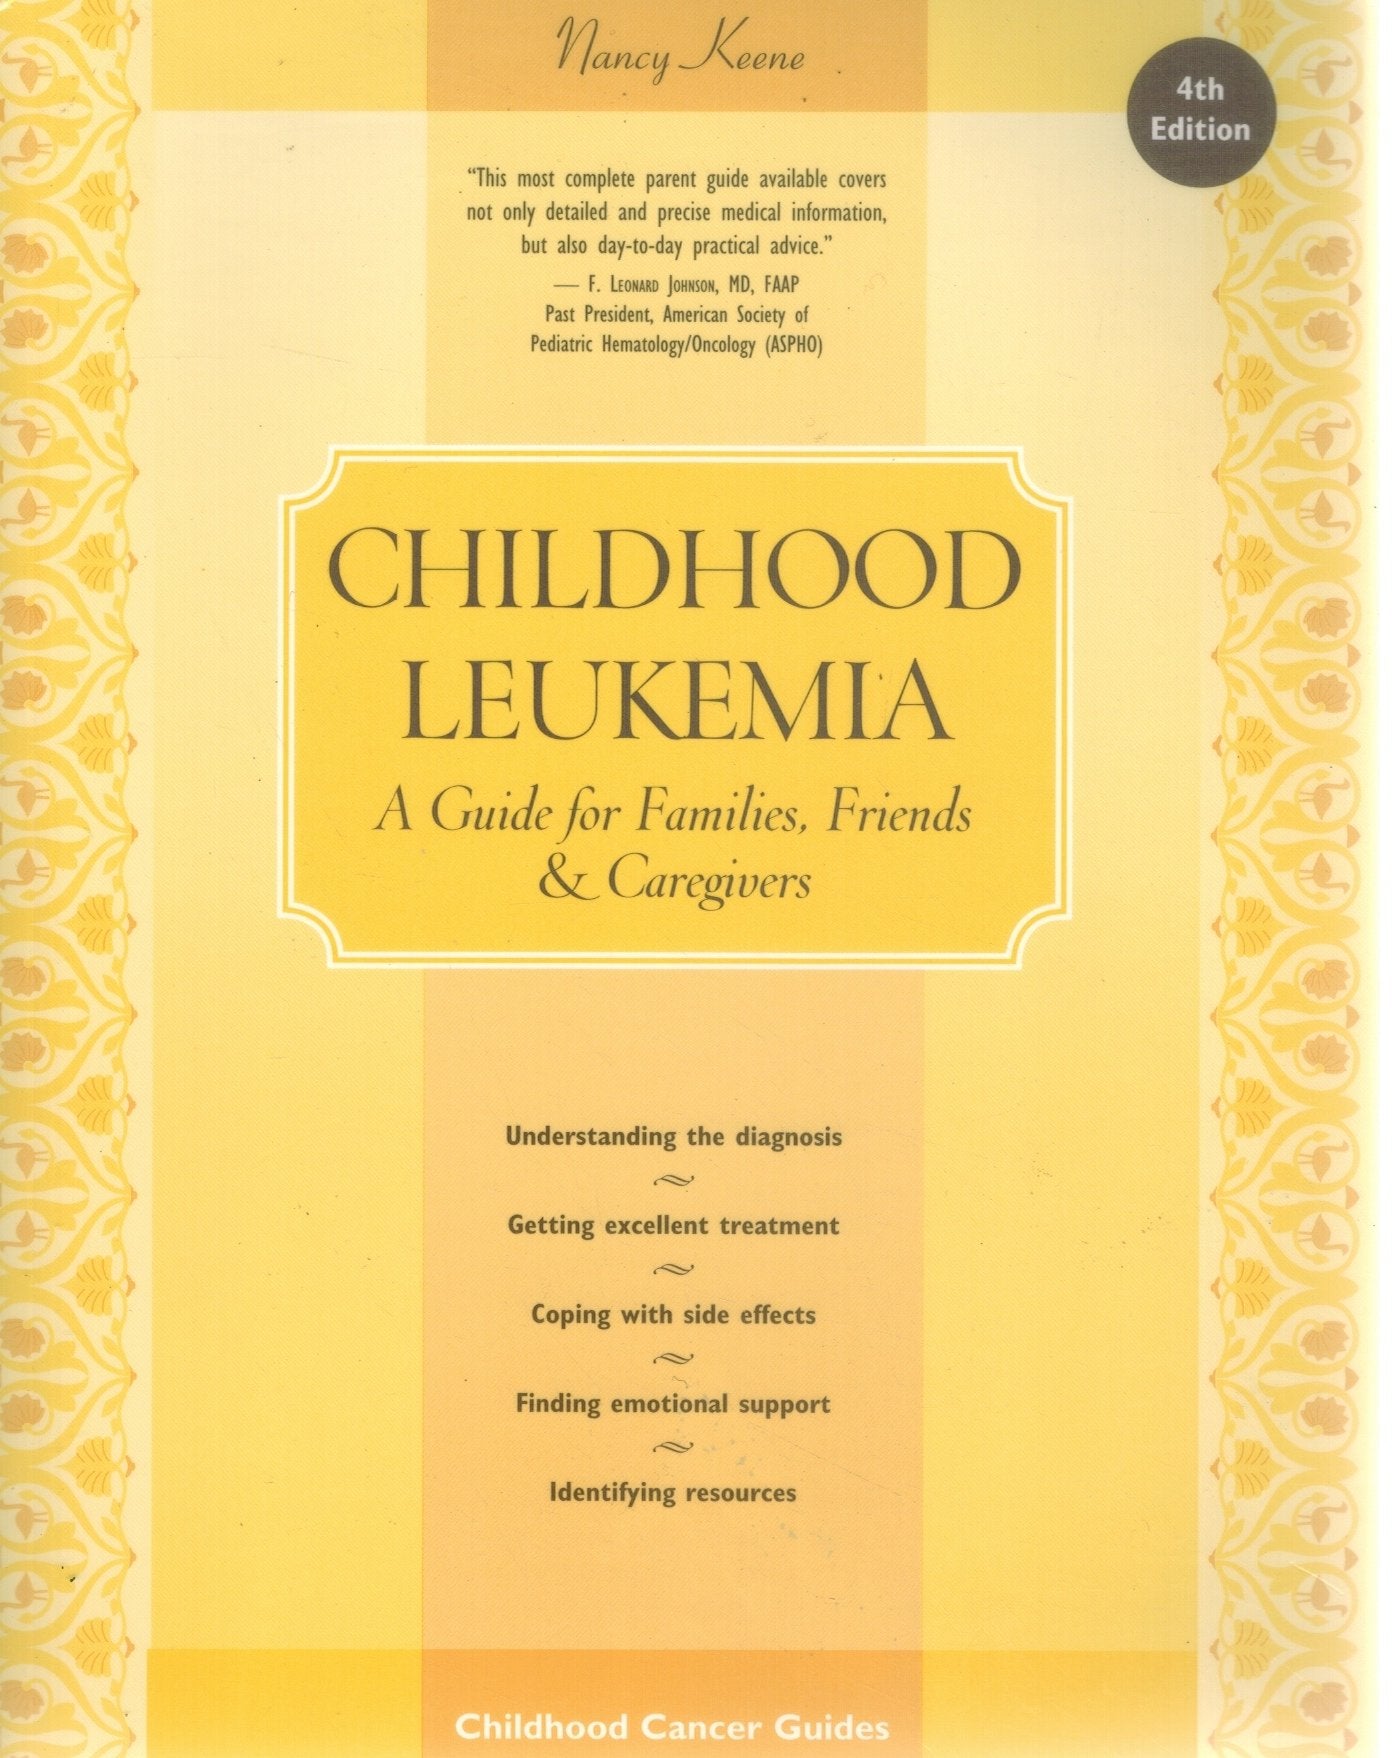 CHILDHOOD LEUKEMIA  A Guide for Families, Friends & Caregivers  by Keene, Nancy